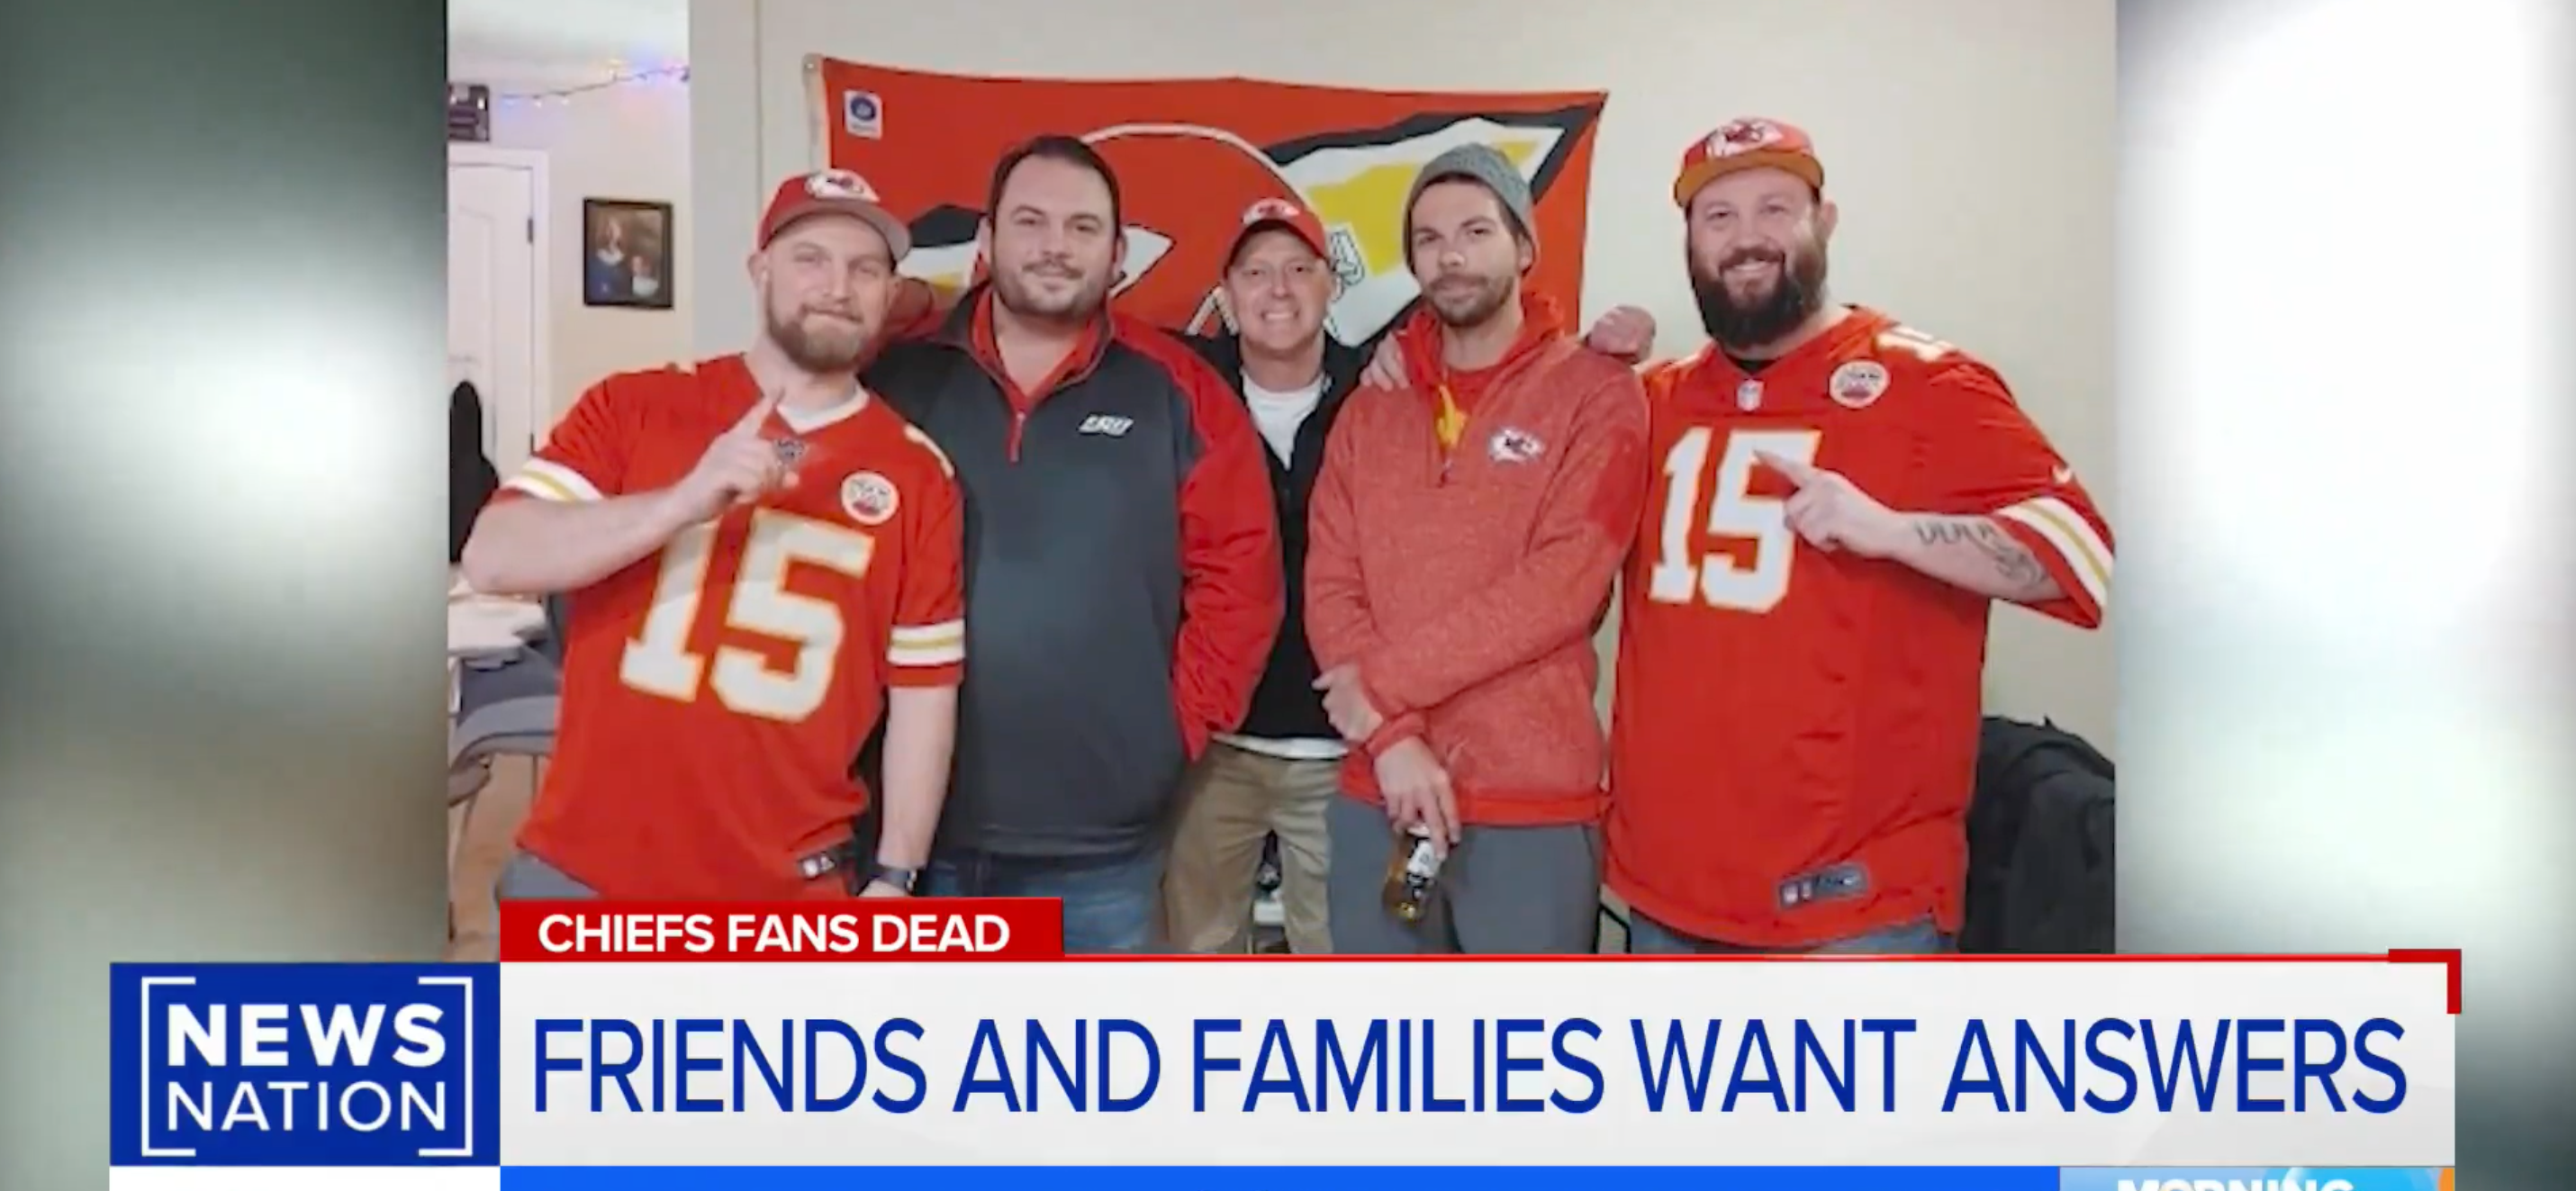 Brother Of Dead Chiefs Fan Claims There Was ‘Something’ In Their System